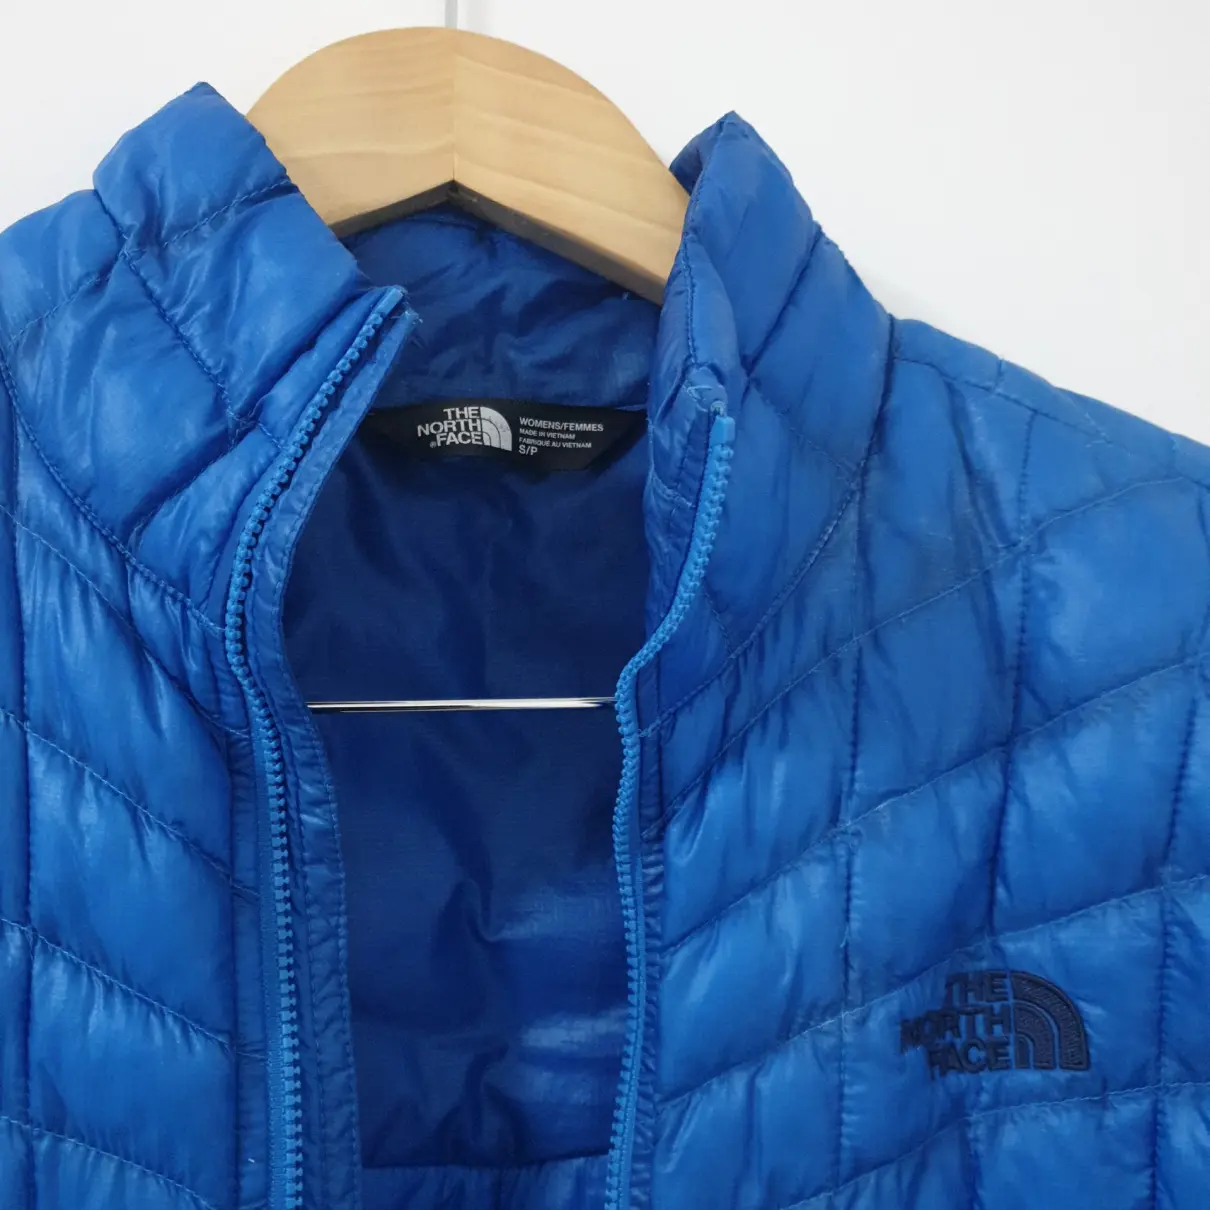 Buy The North Face Dufflecoat online